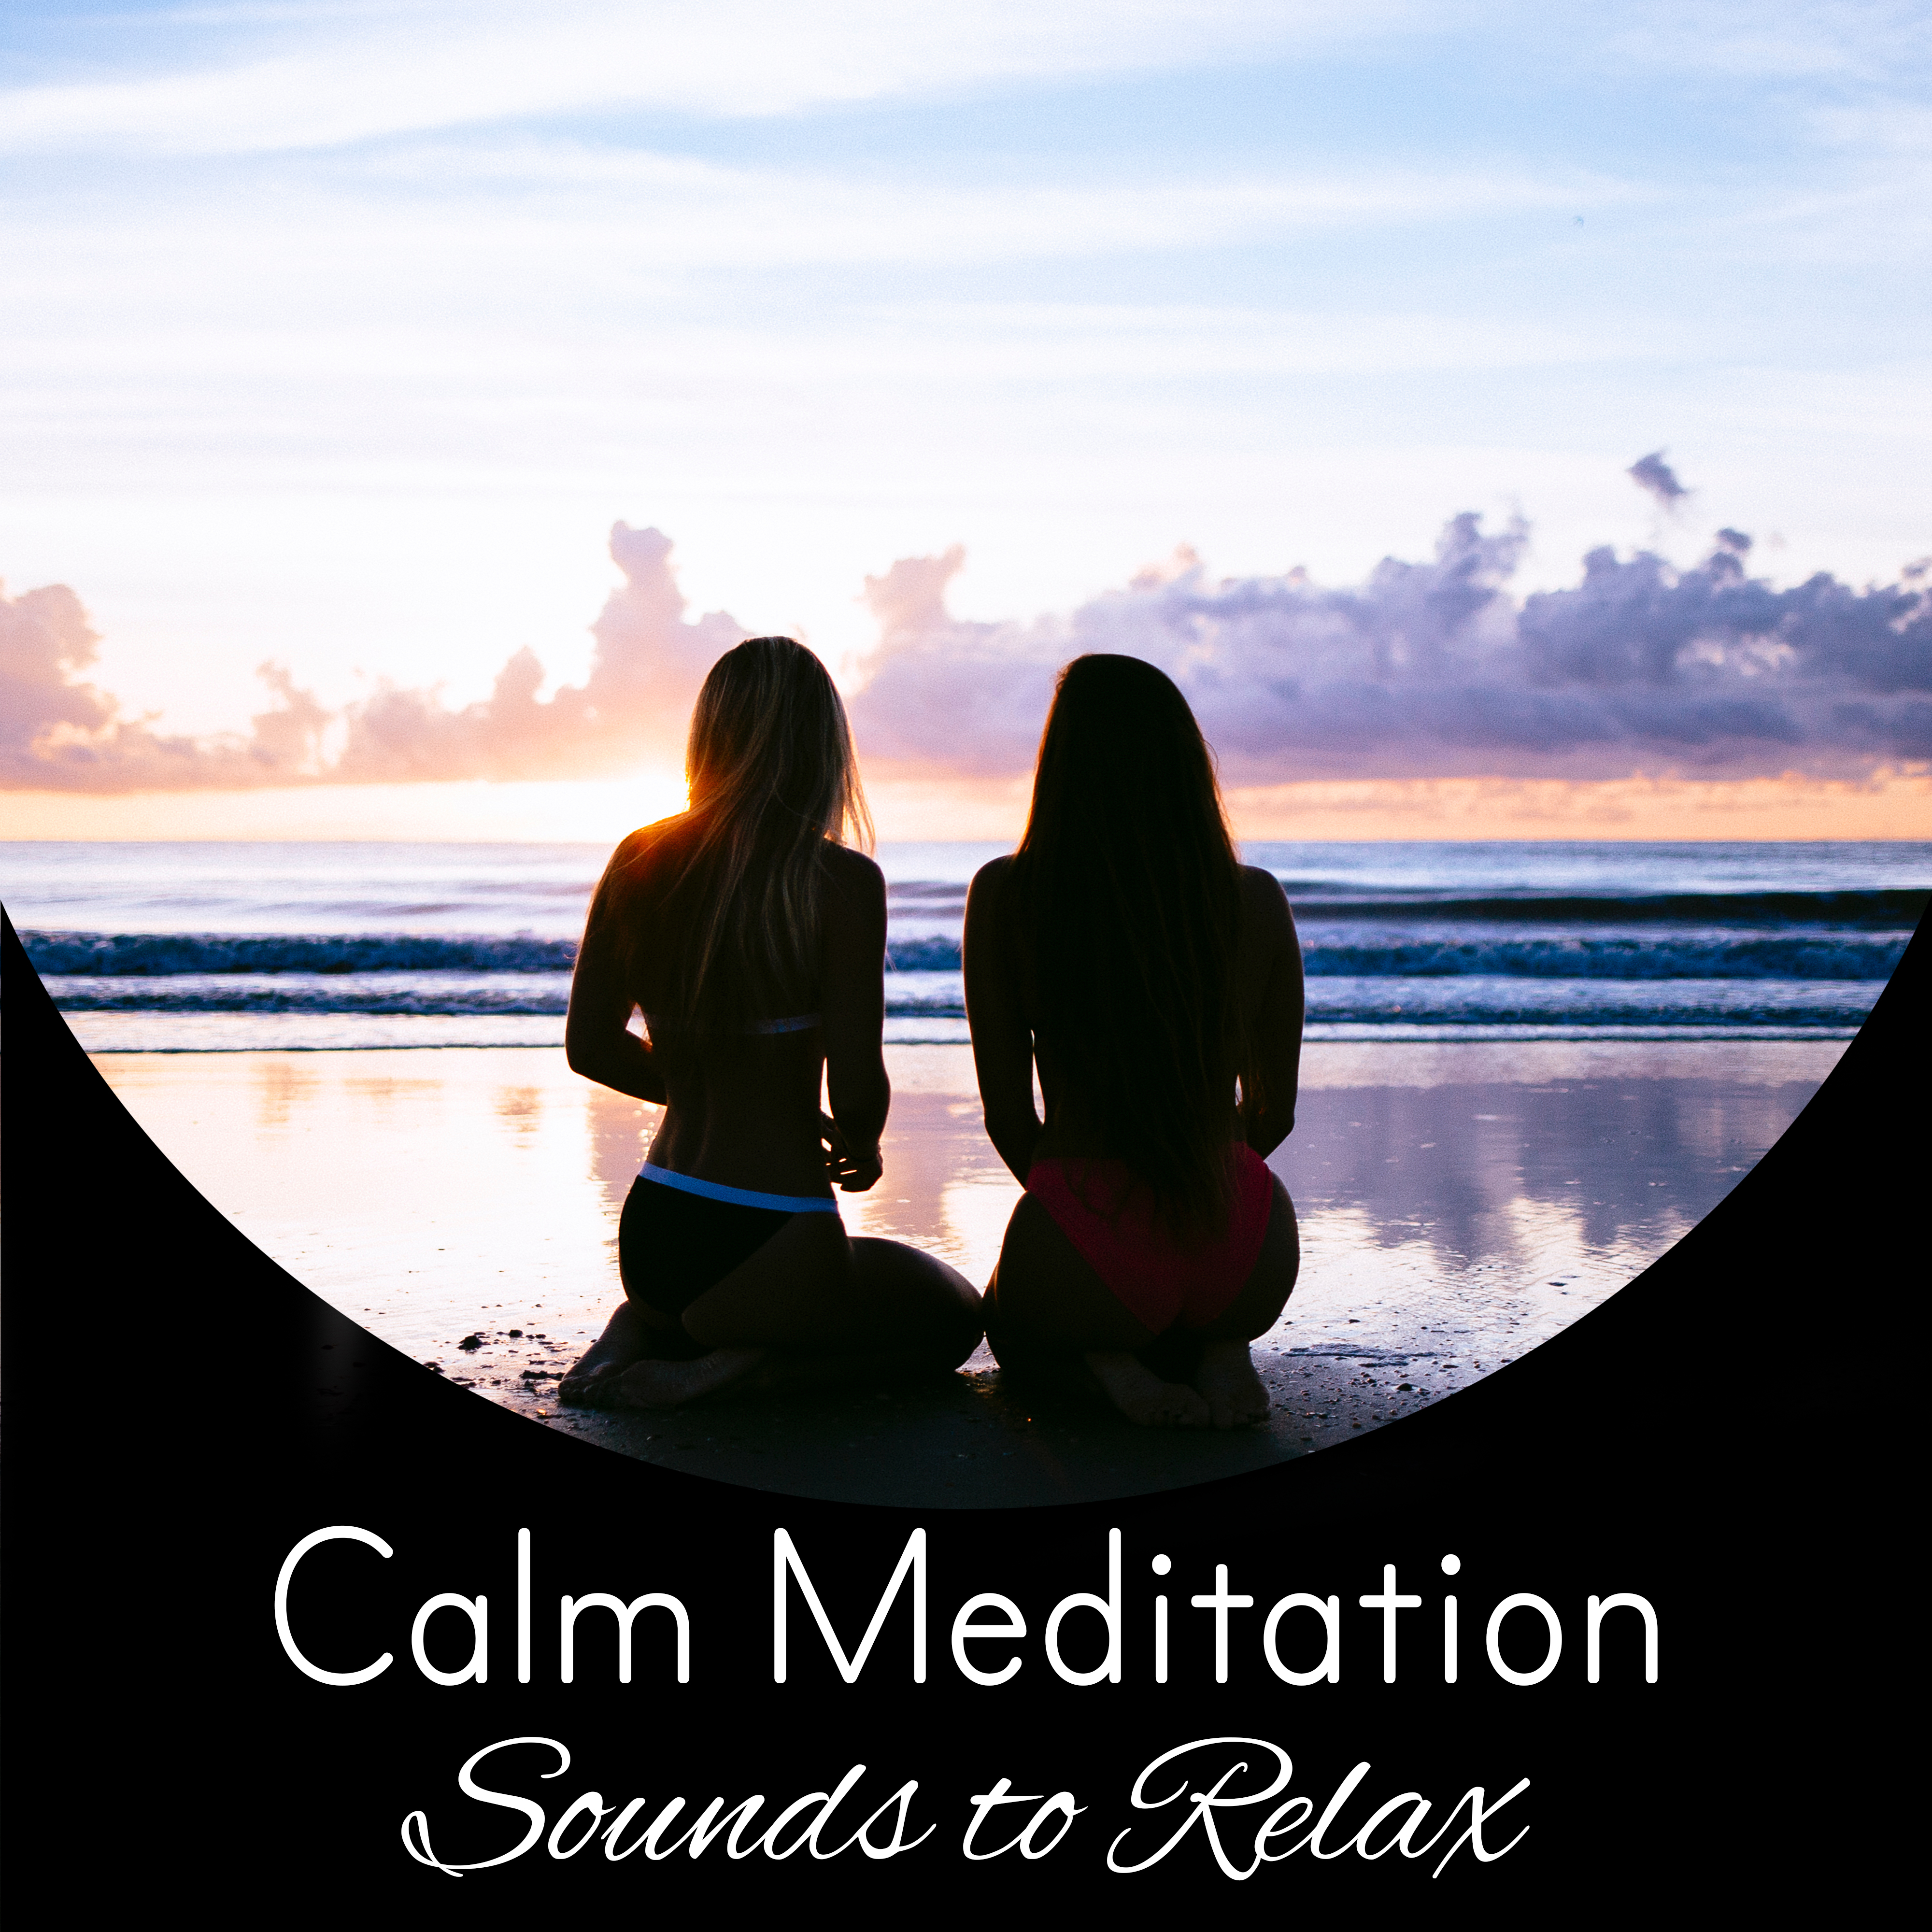 Calm Meditation Sounds to Relax – Inner Peace, Soft Sounds to Rest, Buddha Lounge, Mind Calmness